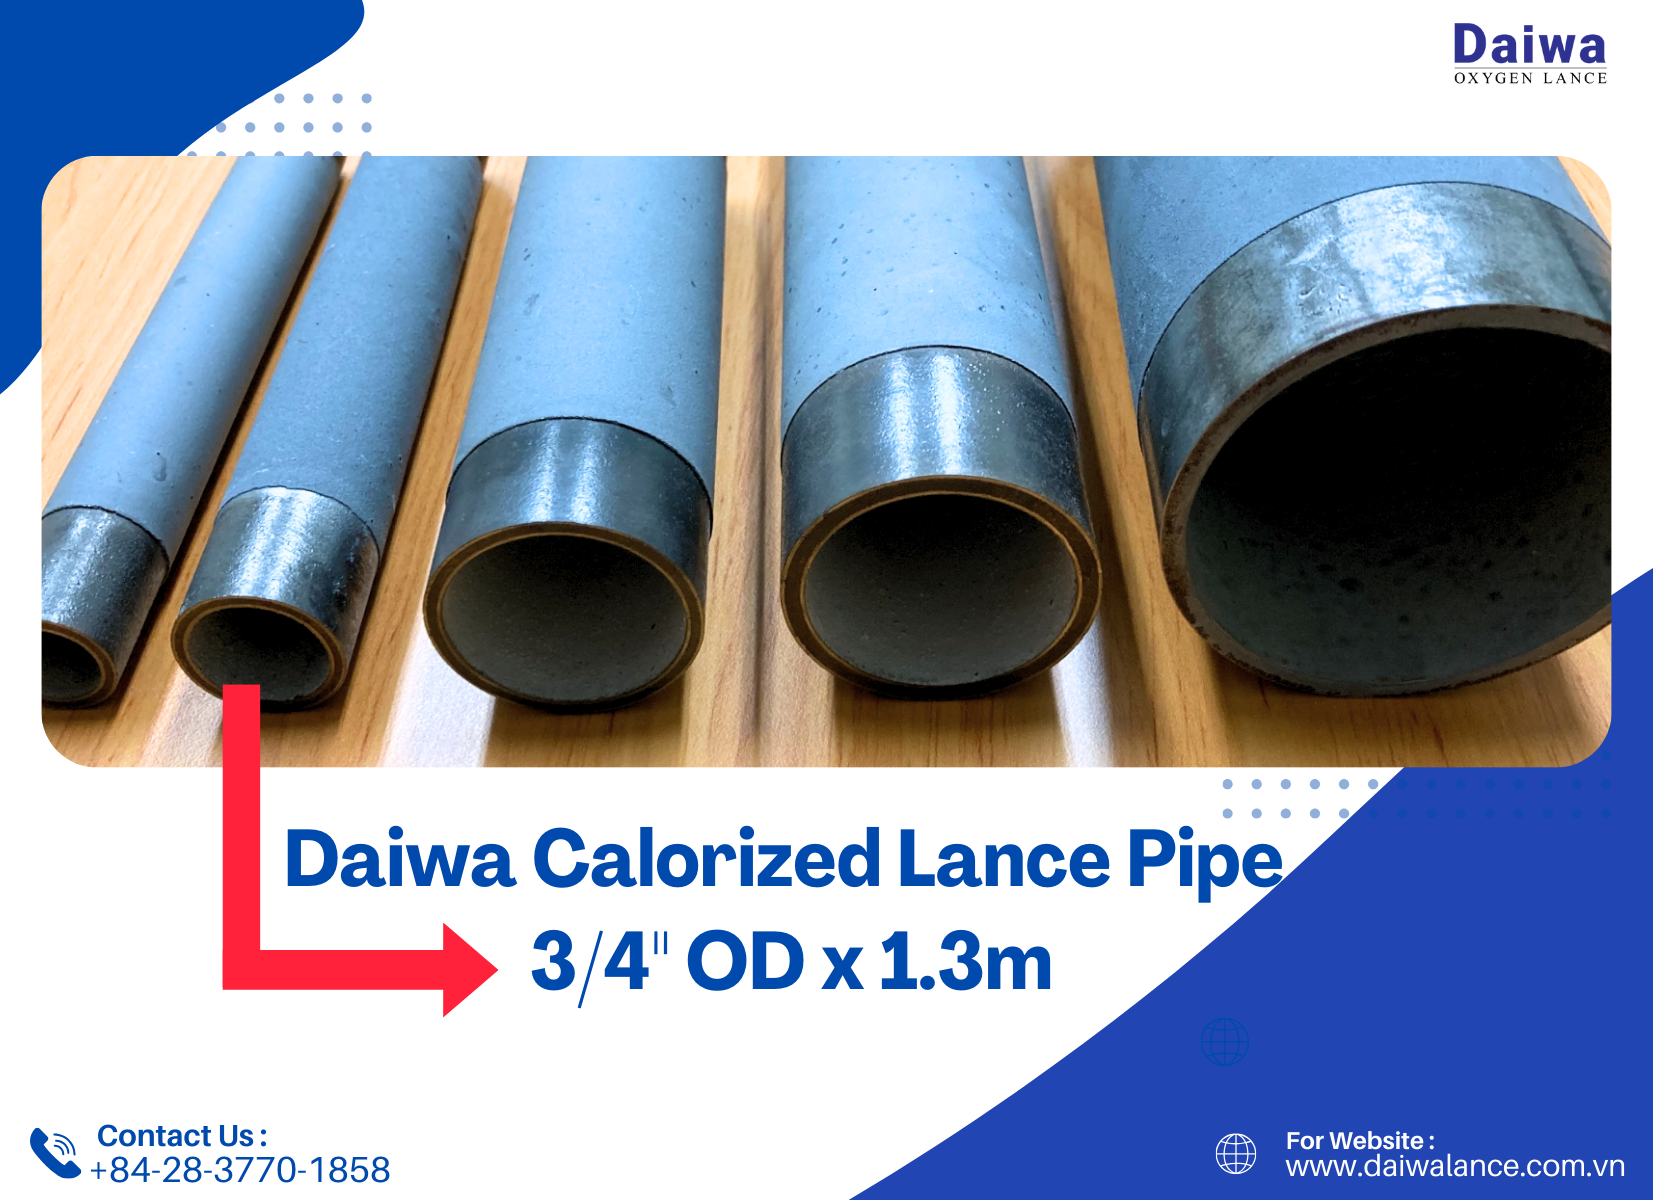 Application of Calorized Lance Pipe 3/4